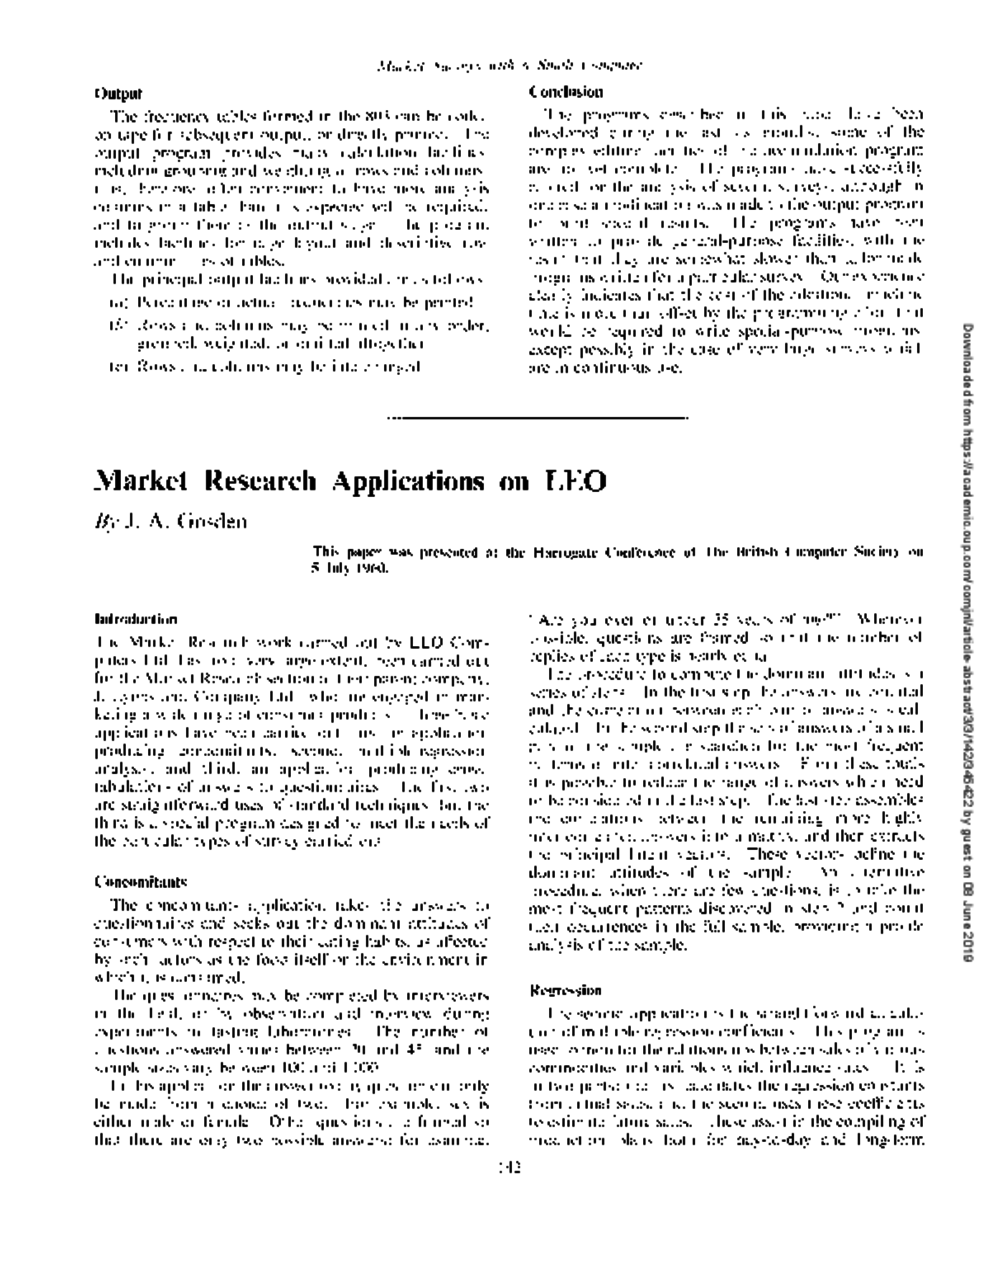 Article: Market Research Applications on LEO